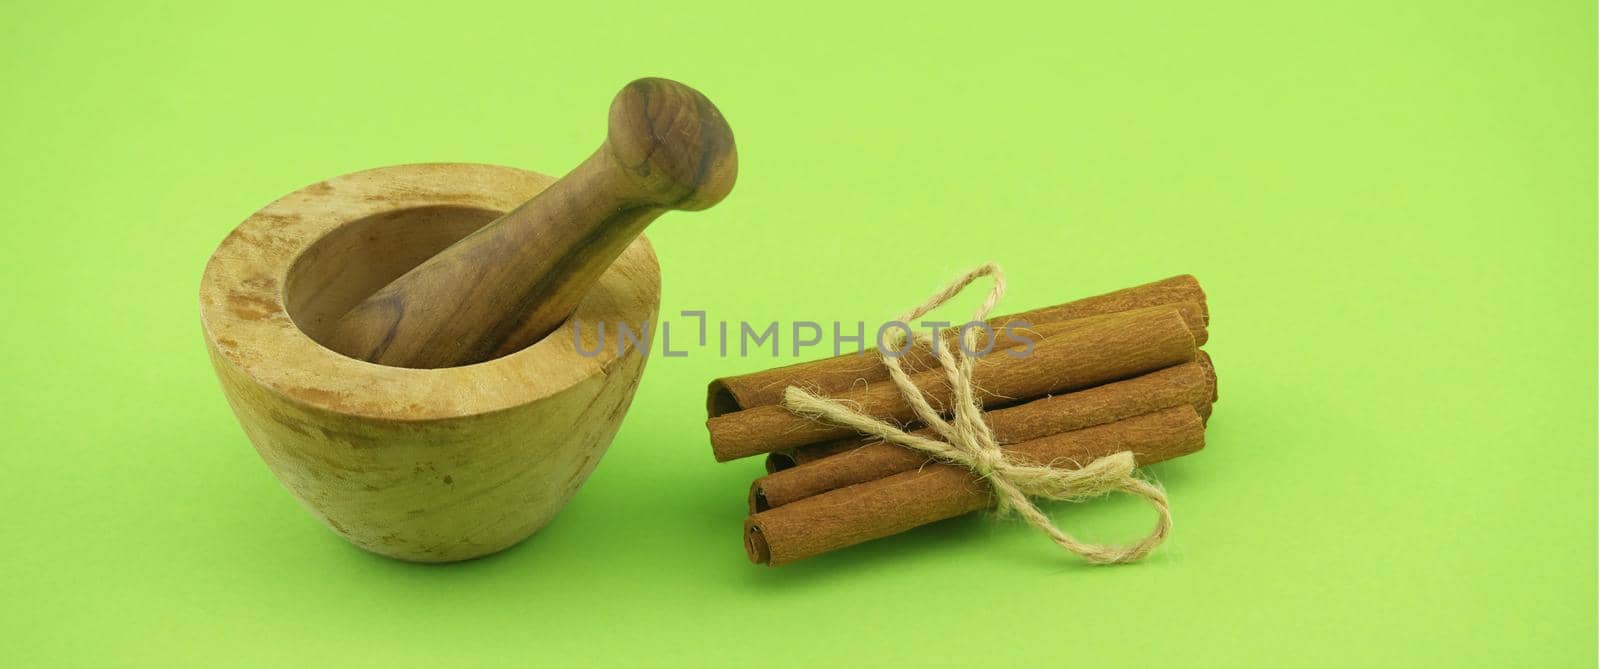 Wooden mortar and pestle near cinnamon sticks bundle tied with jute string over green background and free copy space for text